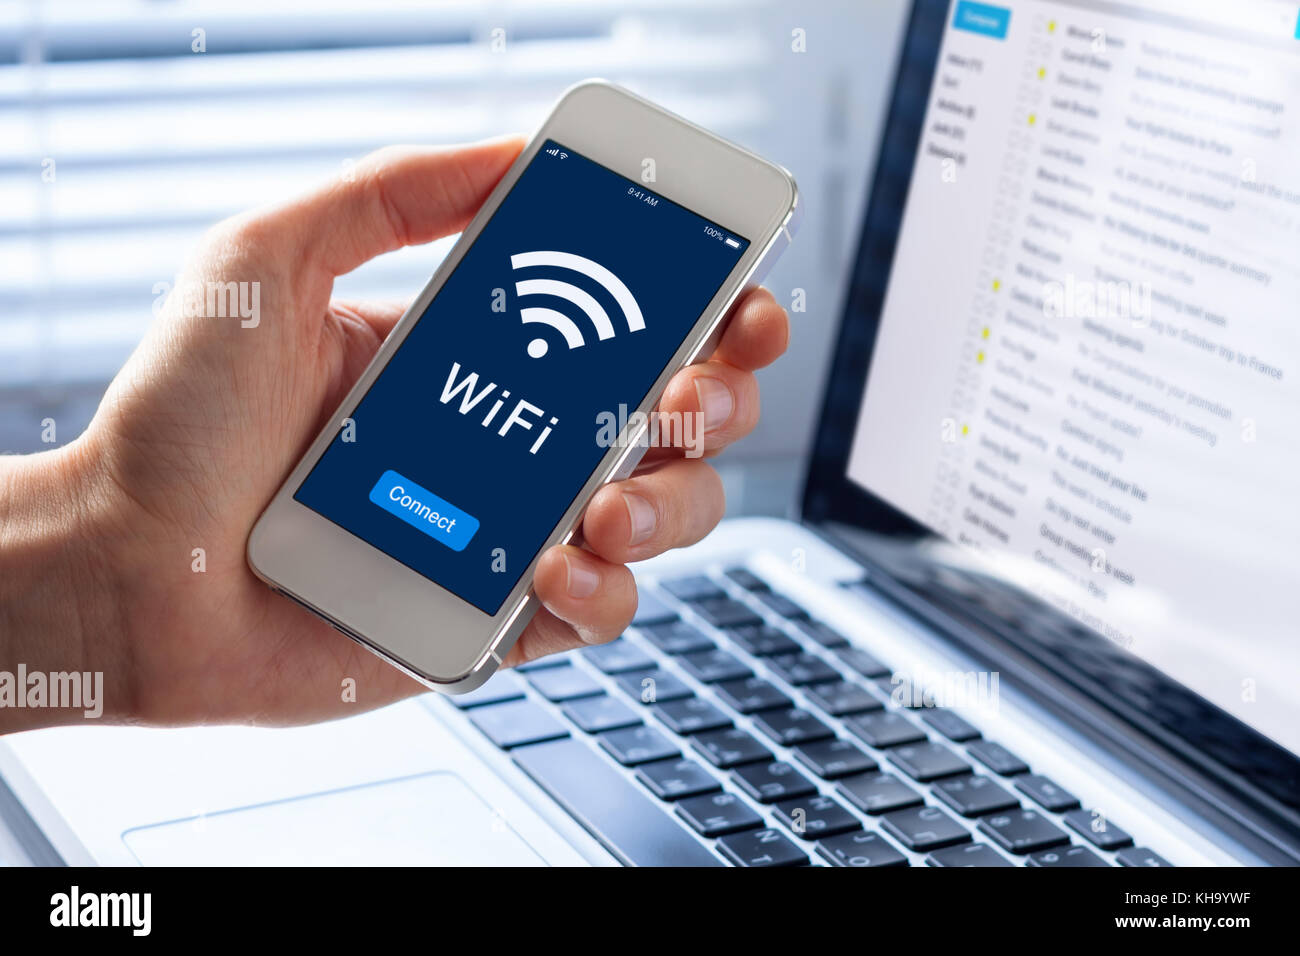 WiFi symbol on smartphone screen with button to connect to wireless internet, close-up of hand holding mobile phone, computer in background Stock Photo